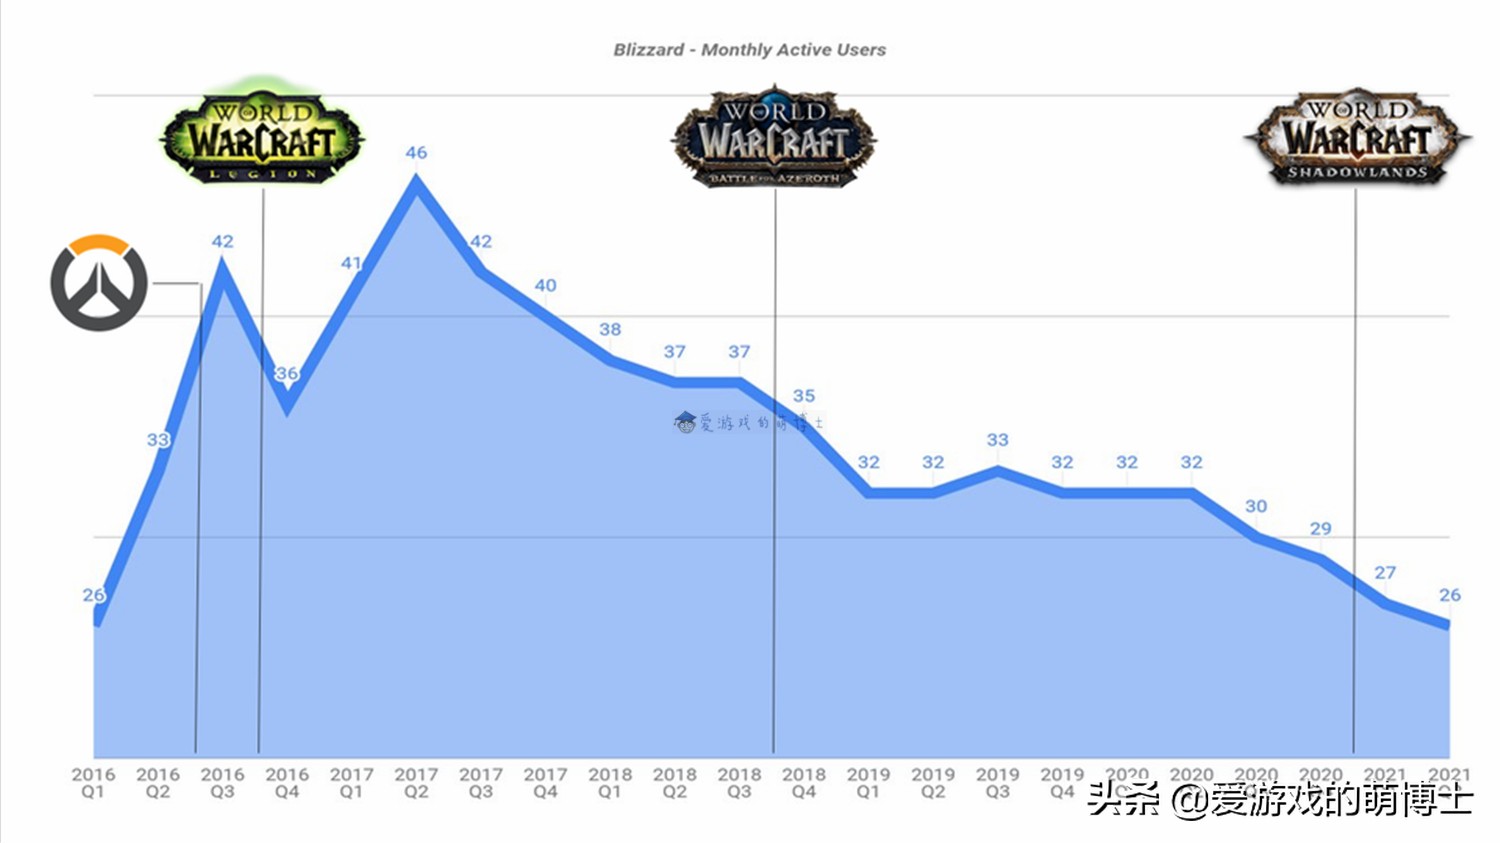 The number of active Blizzard players is decreasing, while the number